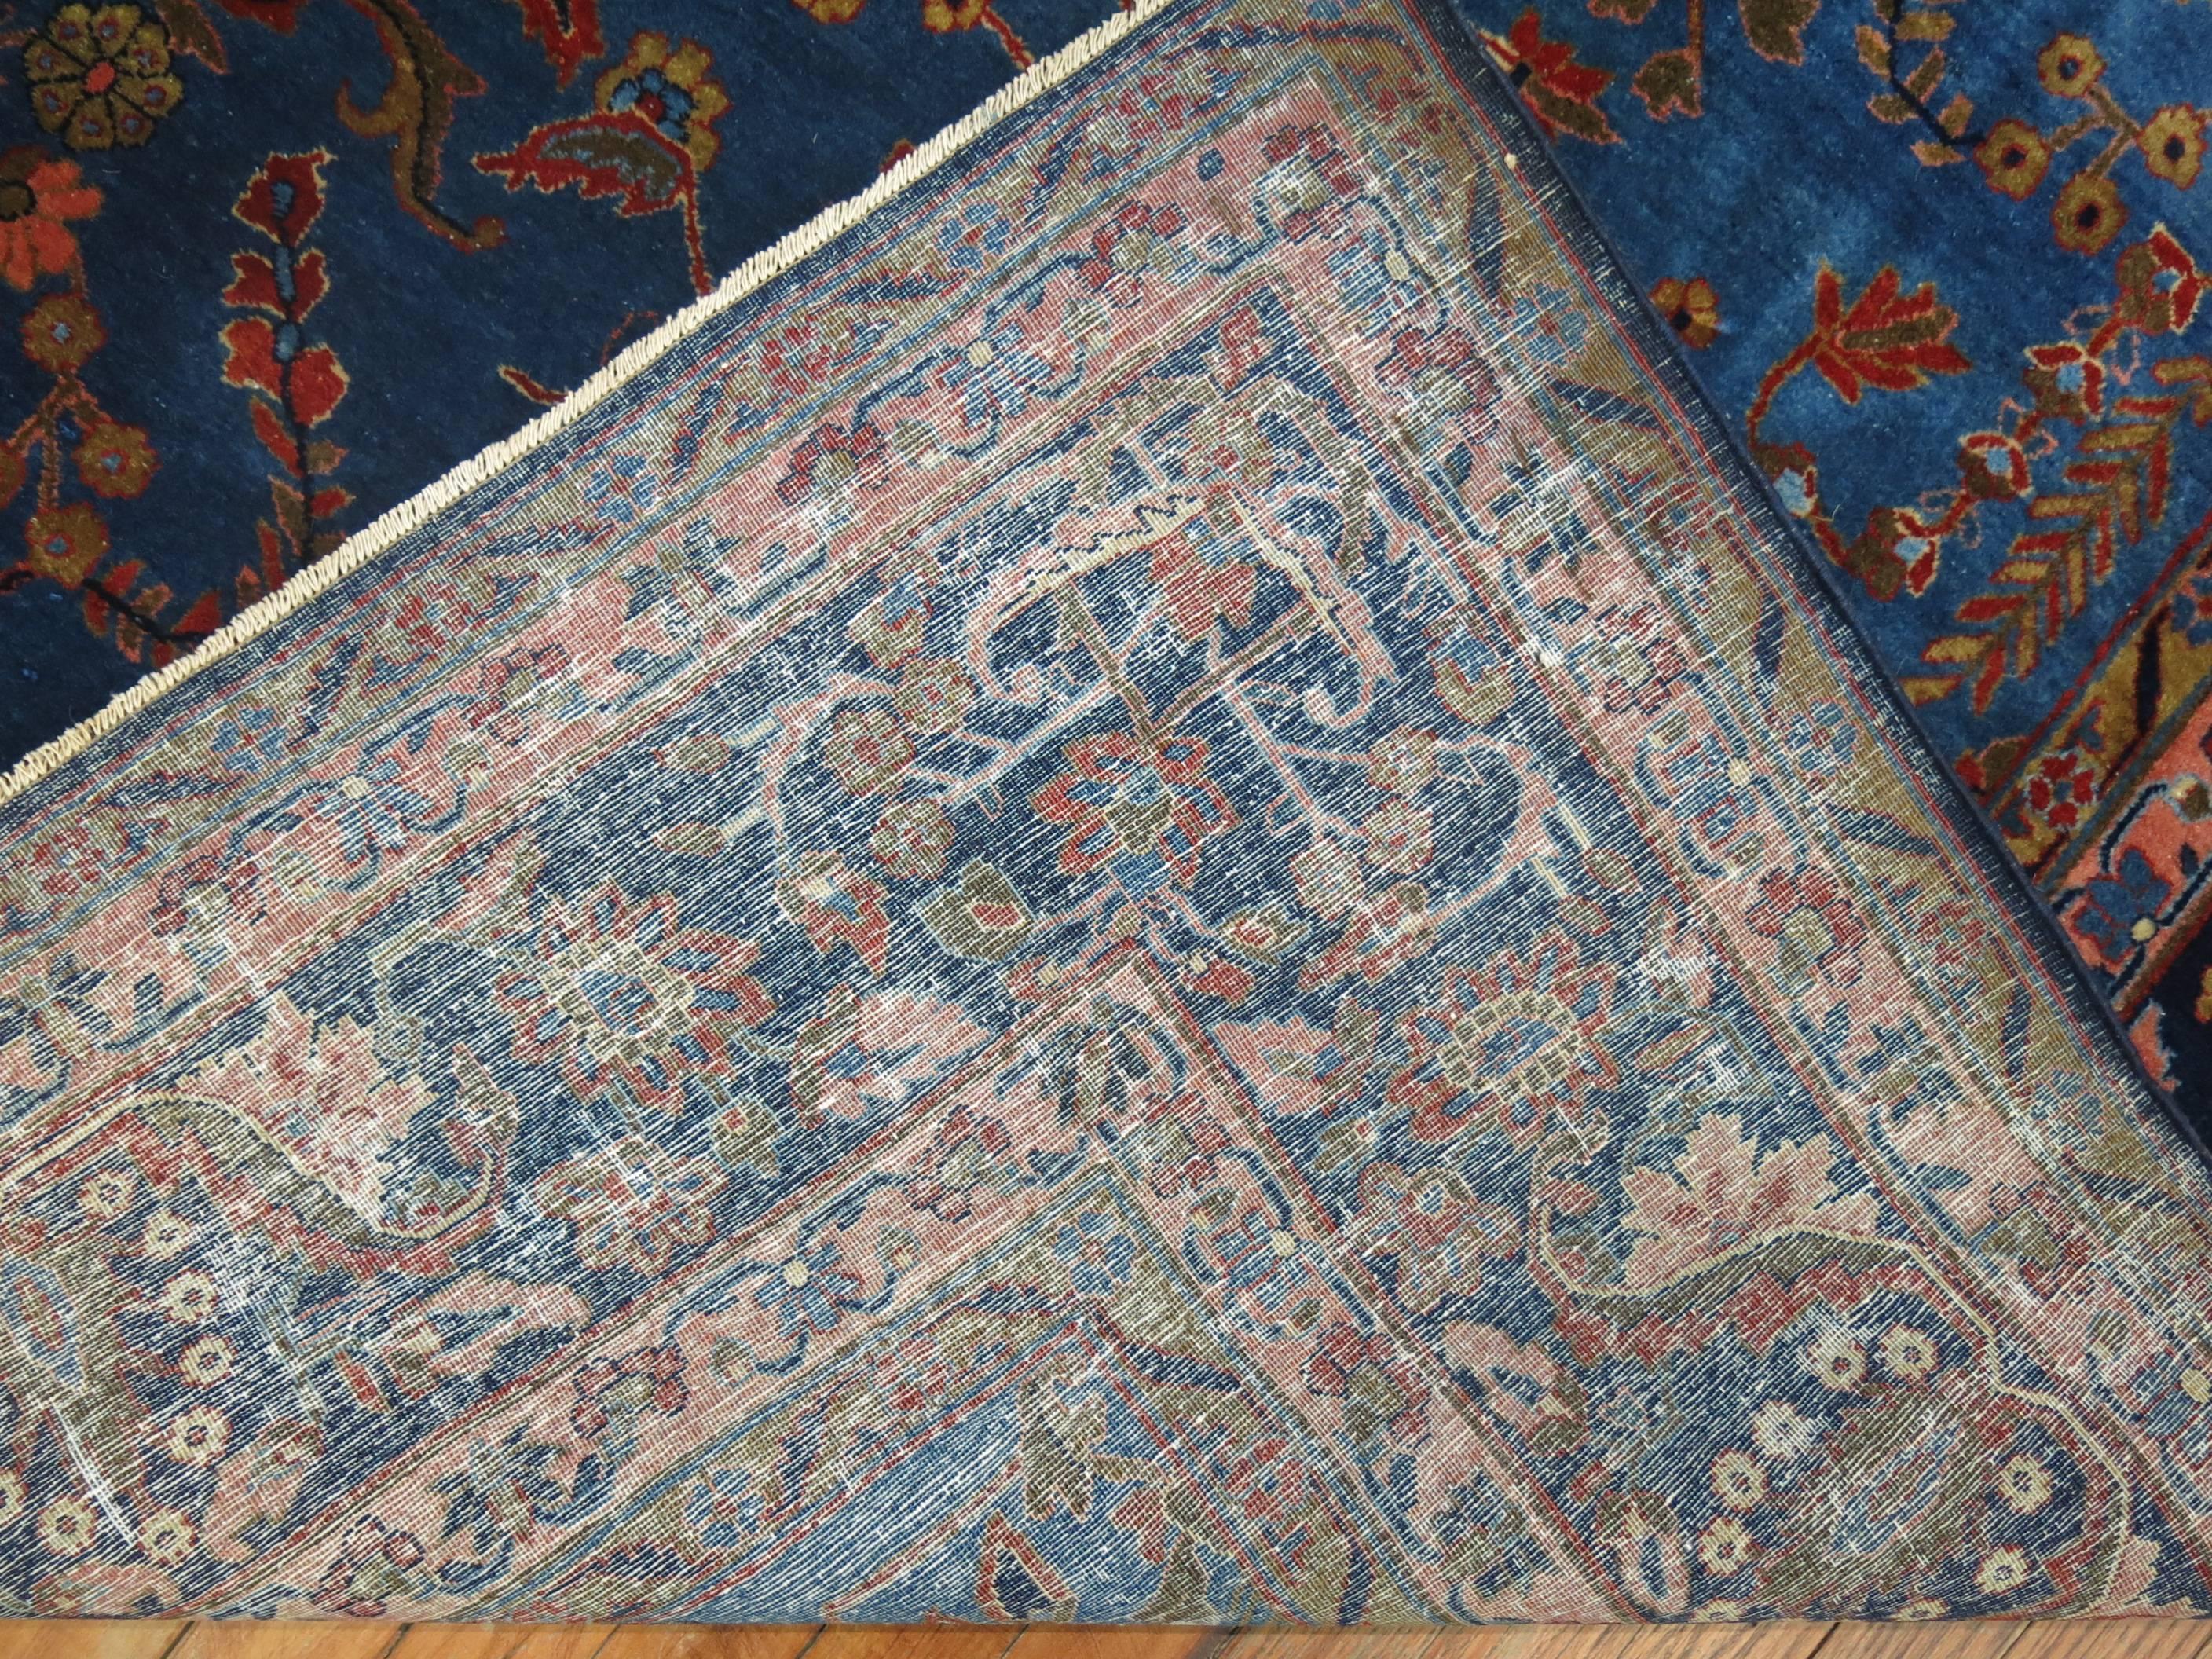 Fascinating finely woven antique Persian signed Kashan rug

The best 19th century and turn-of-the-20th century Kashan carpets, be they of the Manchester wool type or the Mohtasham Kashan style, are quite essentially formal, richly continental, and